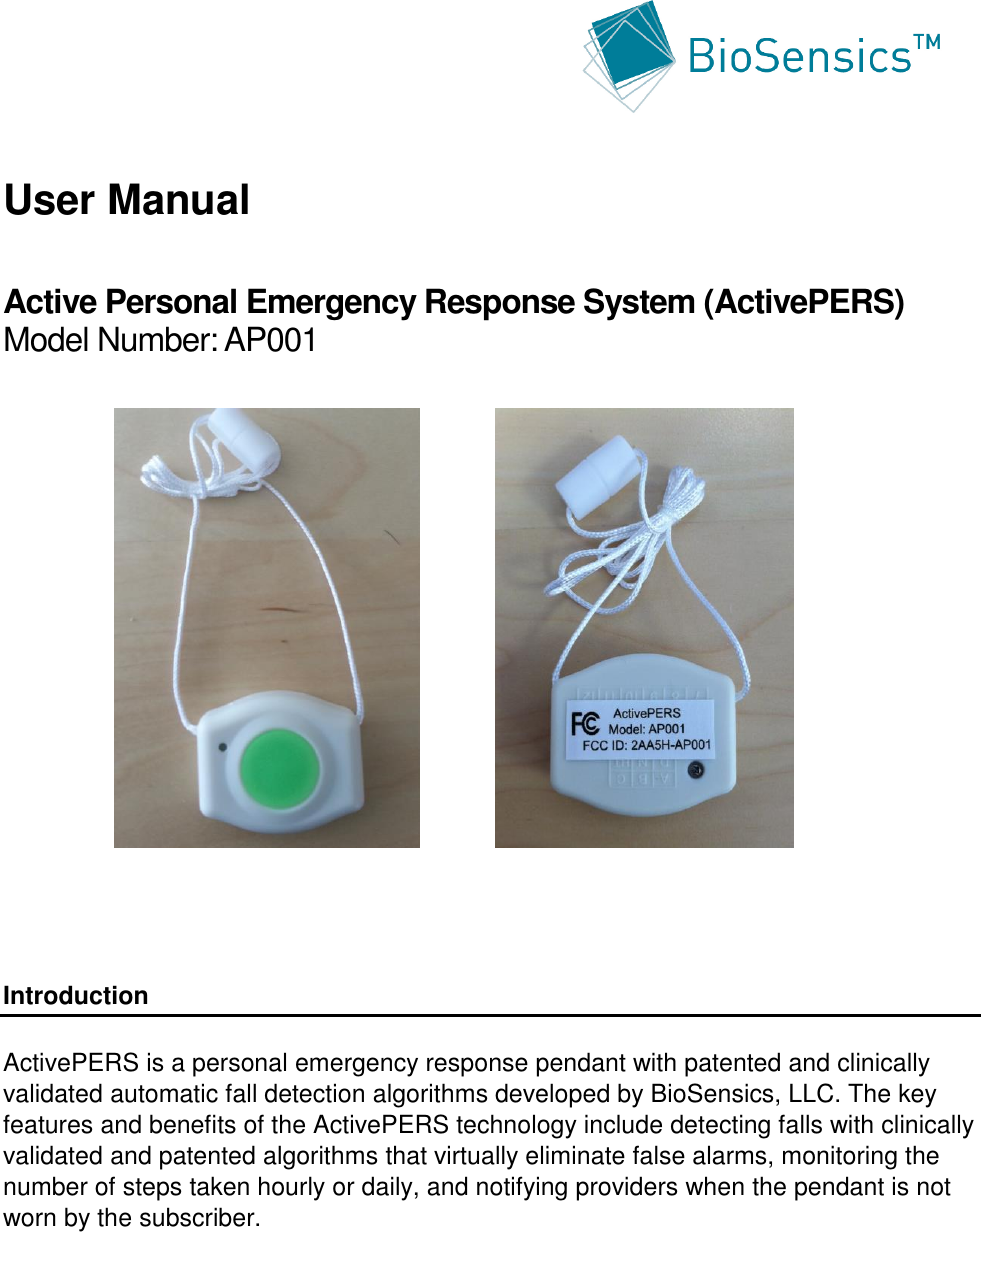      User Manual  Active Personal Emergency Response System (ActivePERS) Model Number: AP001                 Introduction  ActivePERS is a personal emergency response pendant with patented and clinically validated automatic fall detection algorithms developed by BioSensics, LLC. The key features and benefits of the ActivePERS technology include detecting falls with clinically validated and patented algorithms that virtually eliminate false alarms, monitoring the number of steps taken hourly or daily, and notifying providers when the pendant is not worn by the subscriber.      